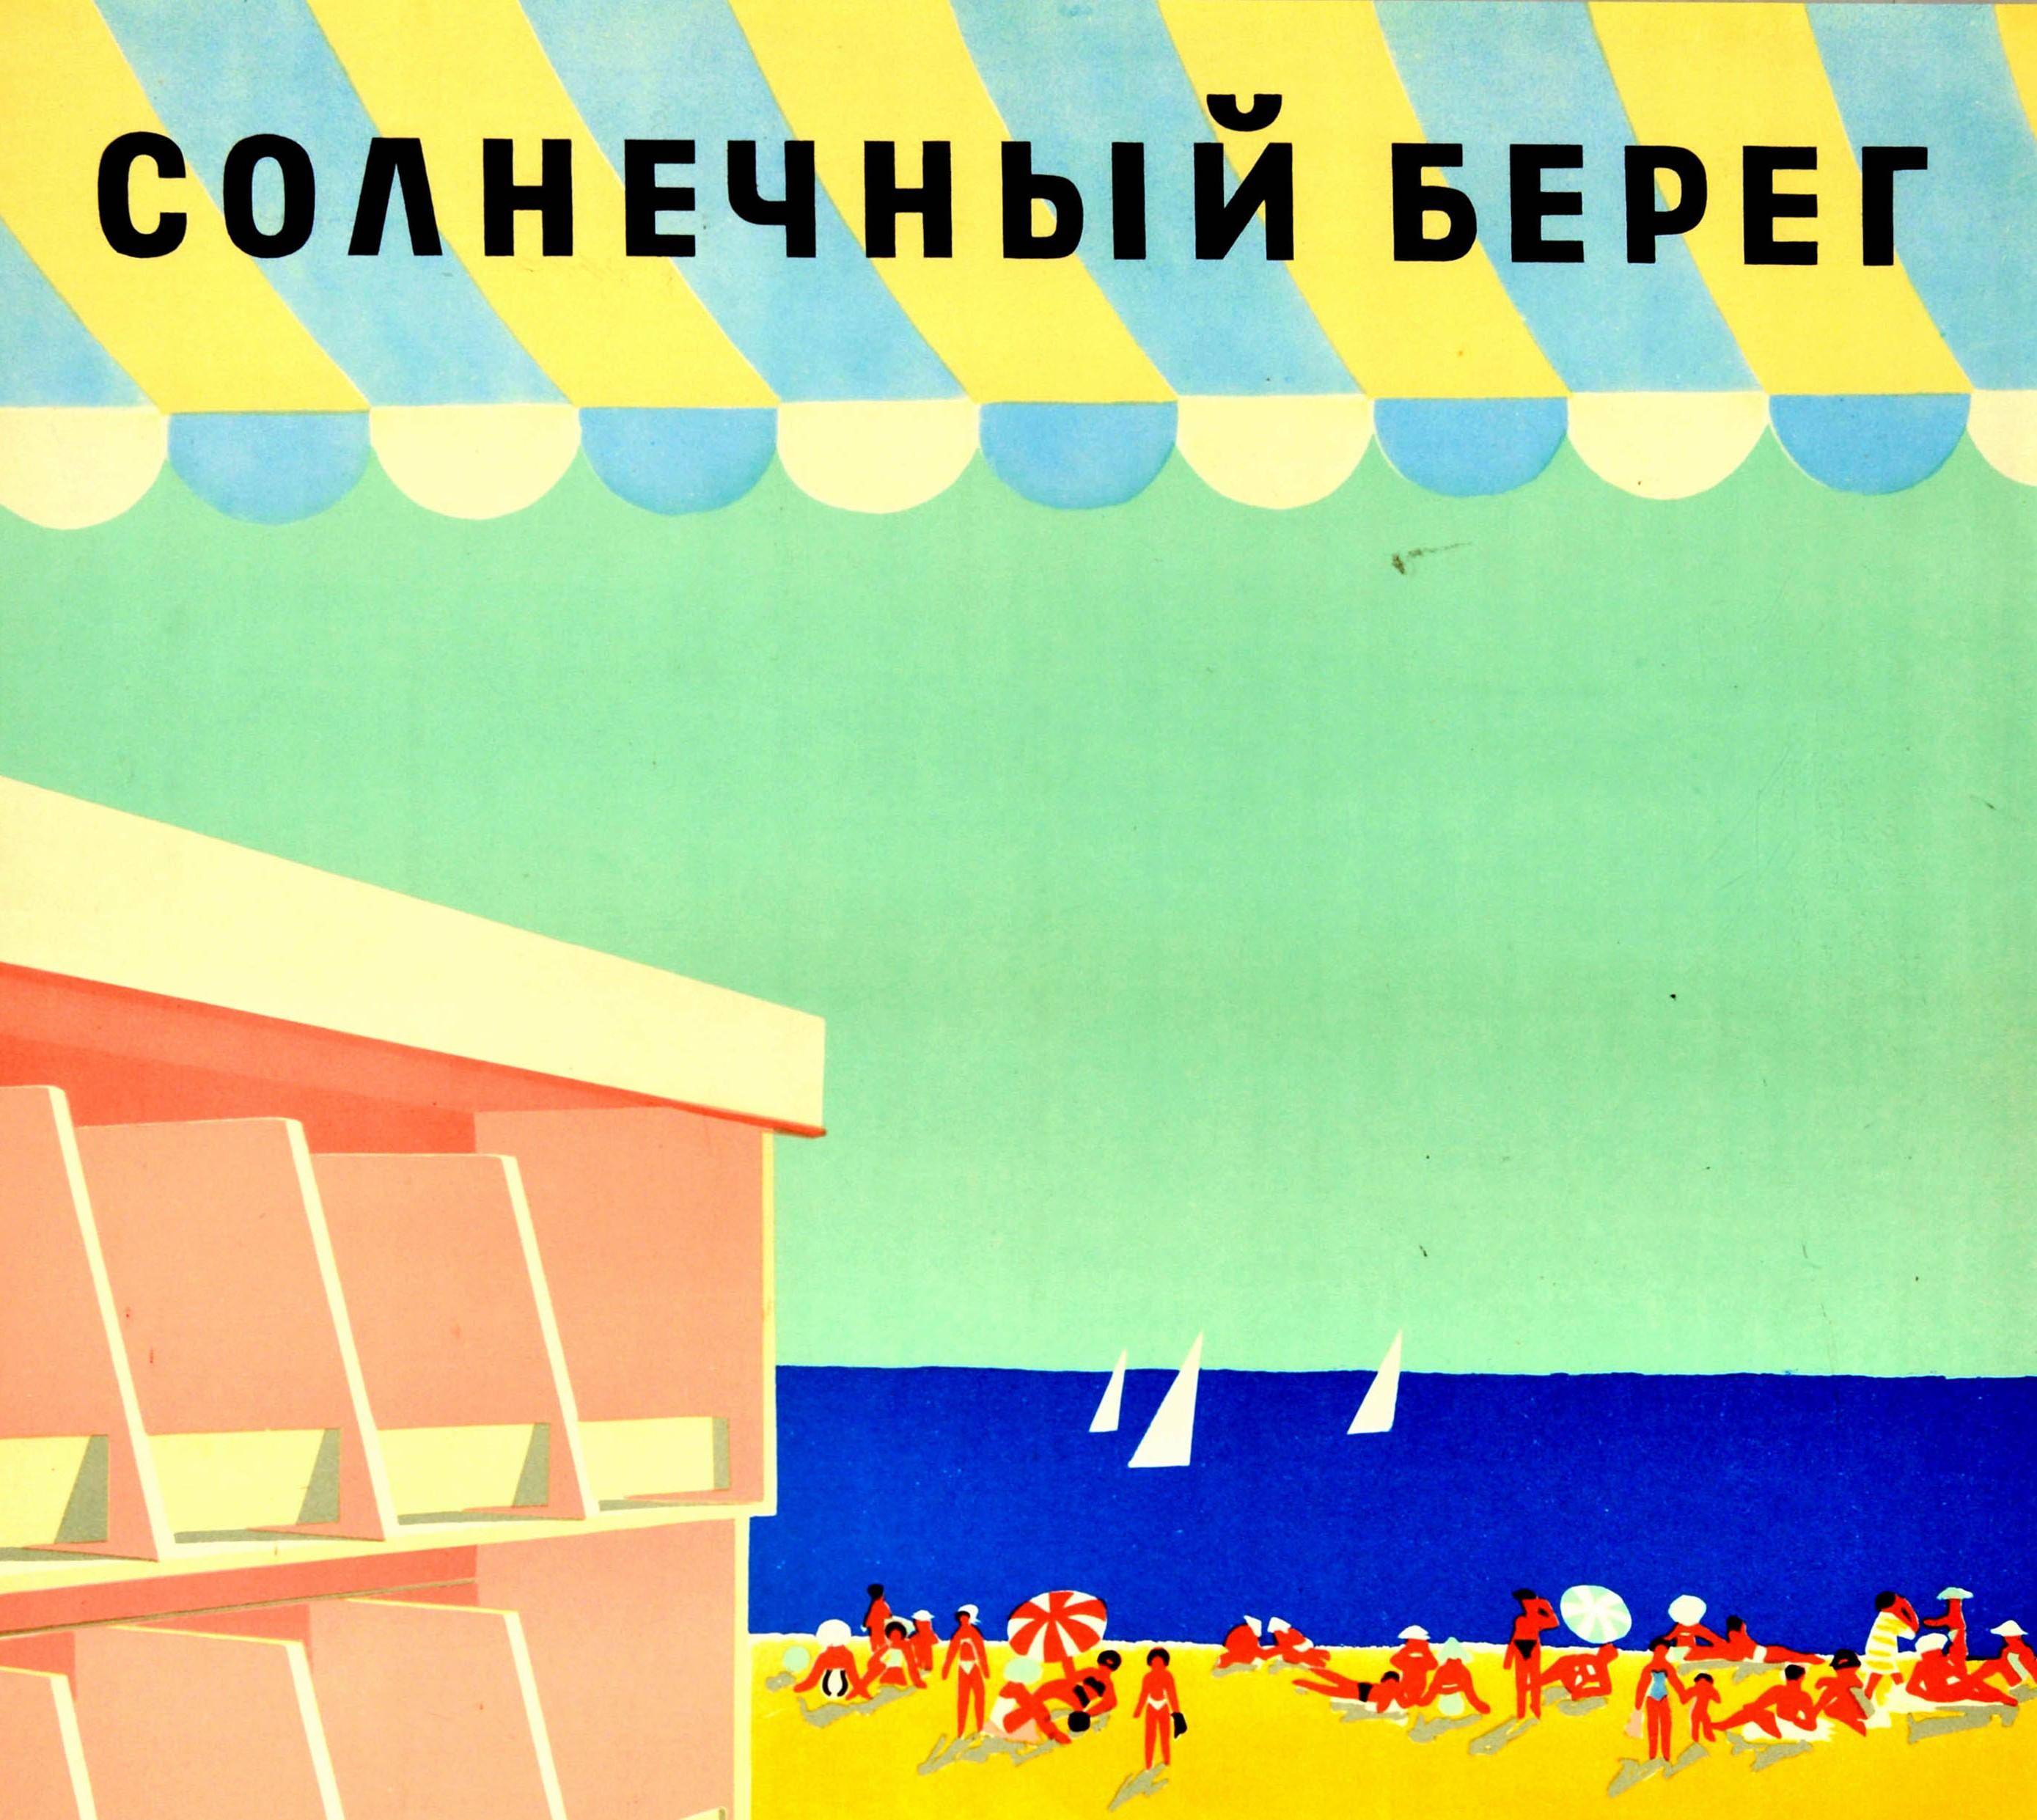 Original vintage travel advertising poster for ????????? ????? ???????? ???????????? / The Sunny Beach Bulgaria Balkantourist featuring a modernist style design of a scenic view from a balcony of people sunbathing and enjoying their holiday on a